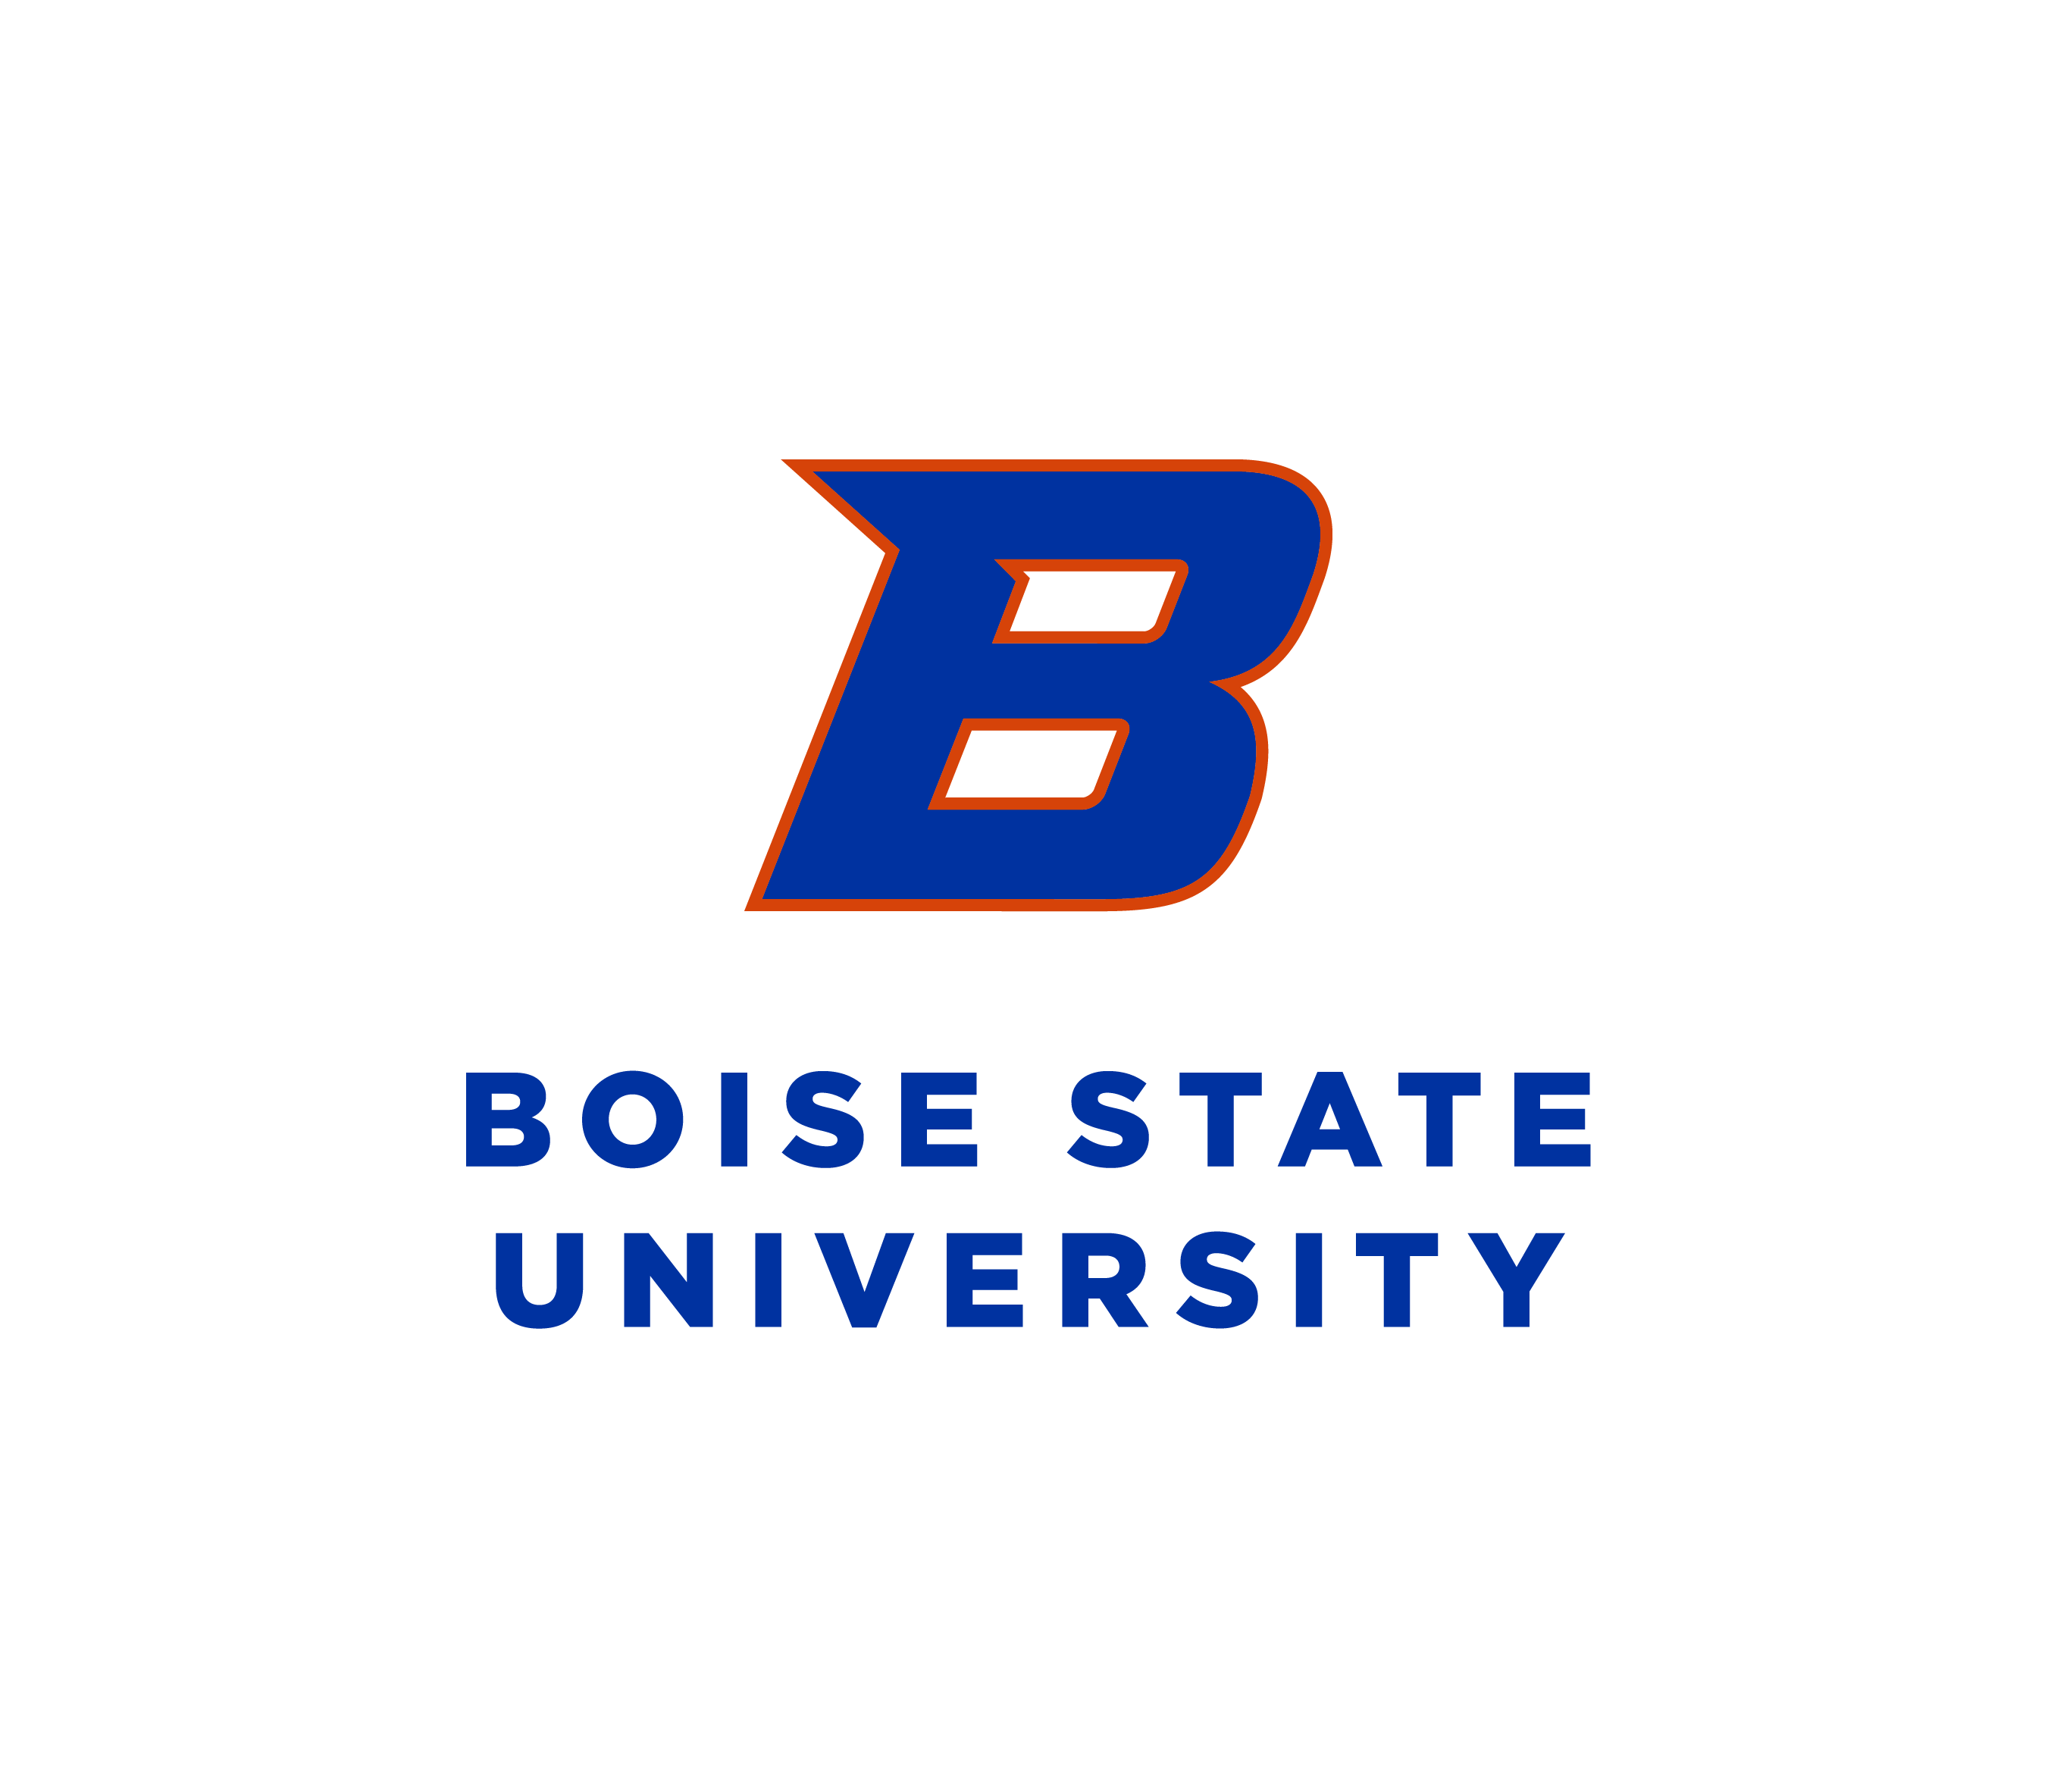 More courses from Boise State University, CyberOperations & Resilience (CORe) Program